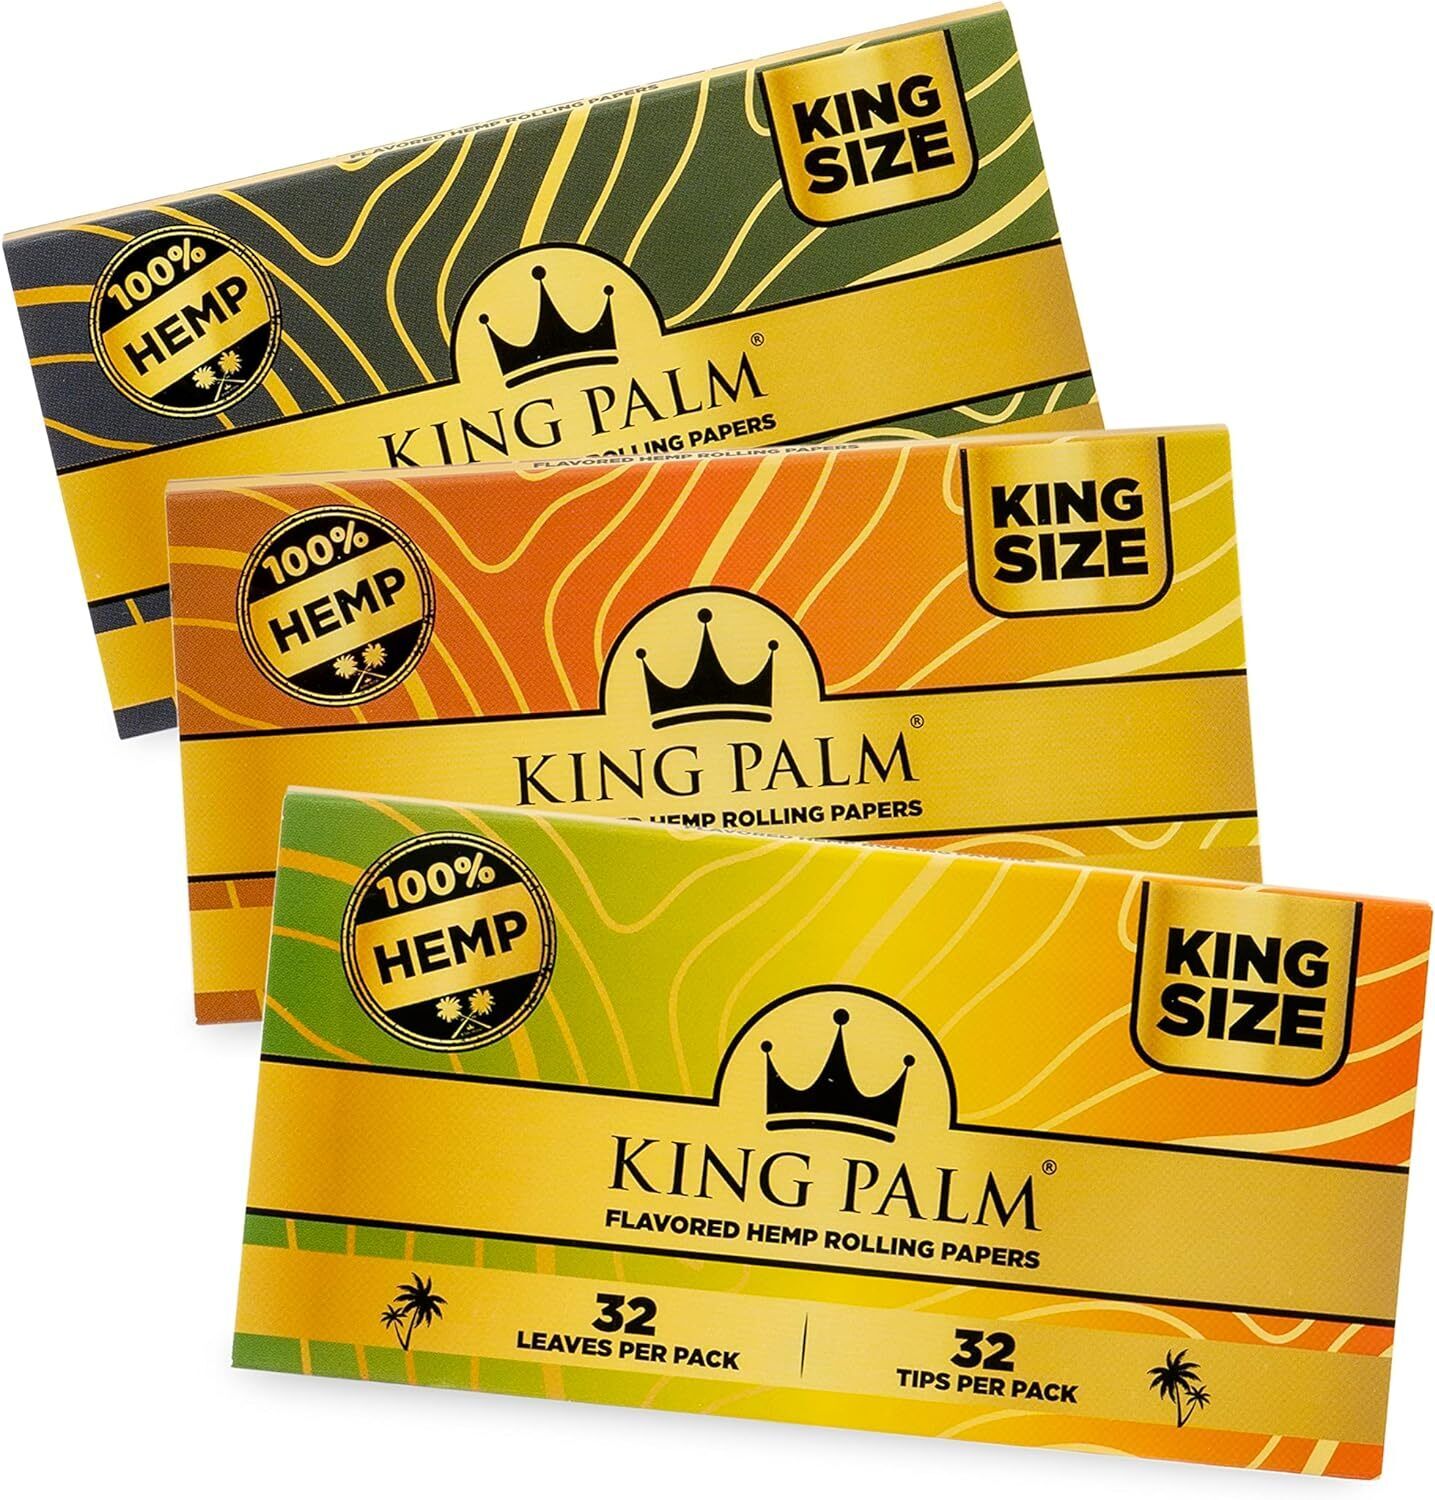 King Palm | King Size | Mixed Flavored Rolling Papers & Tips | 3 Booklet